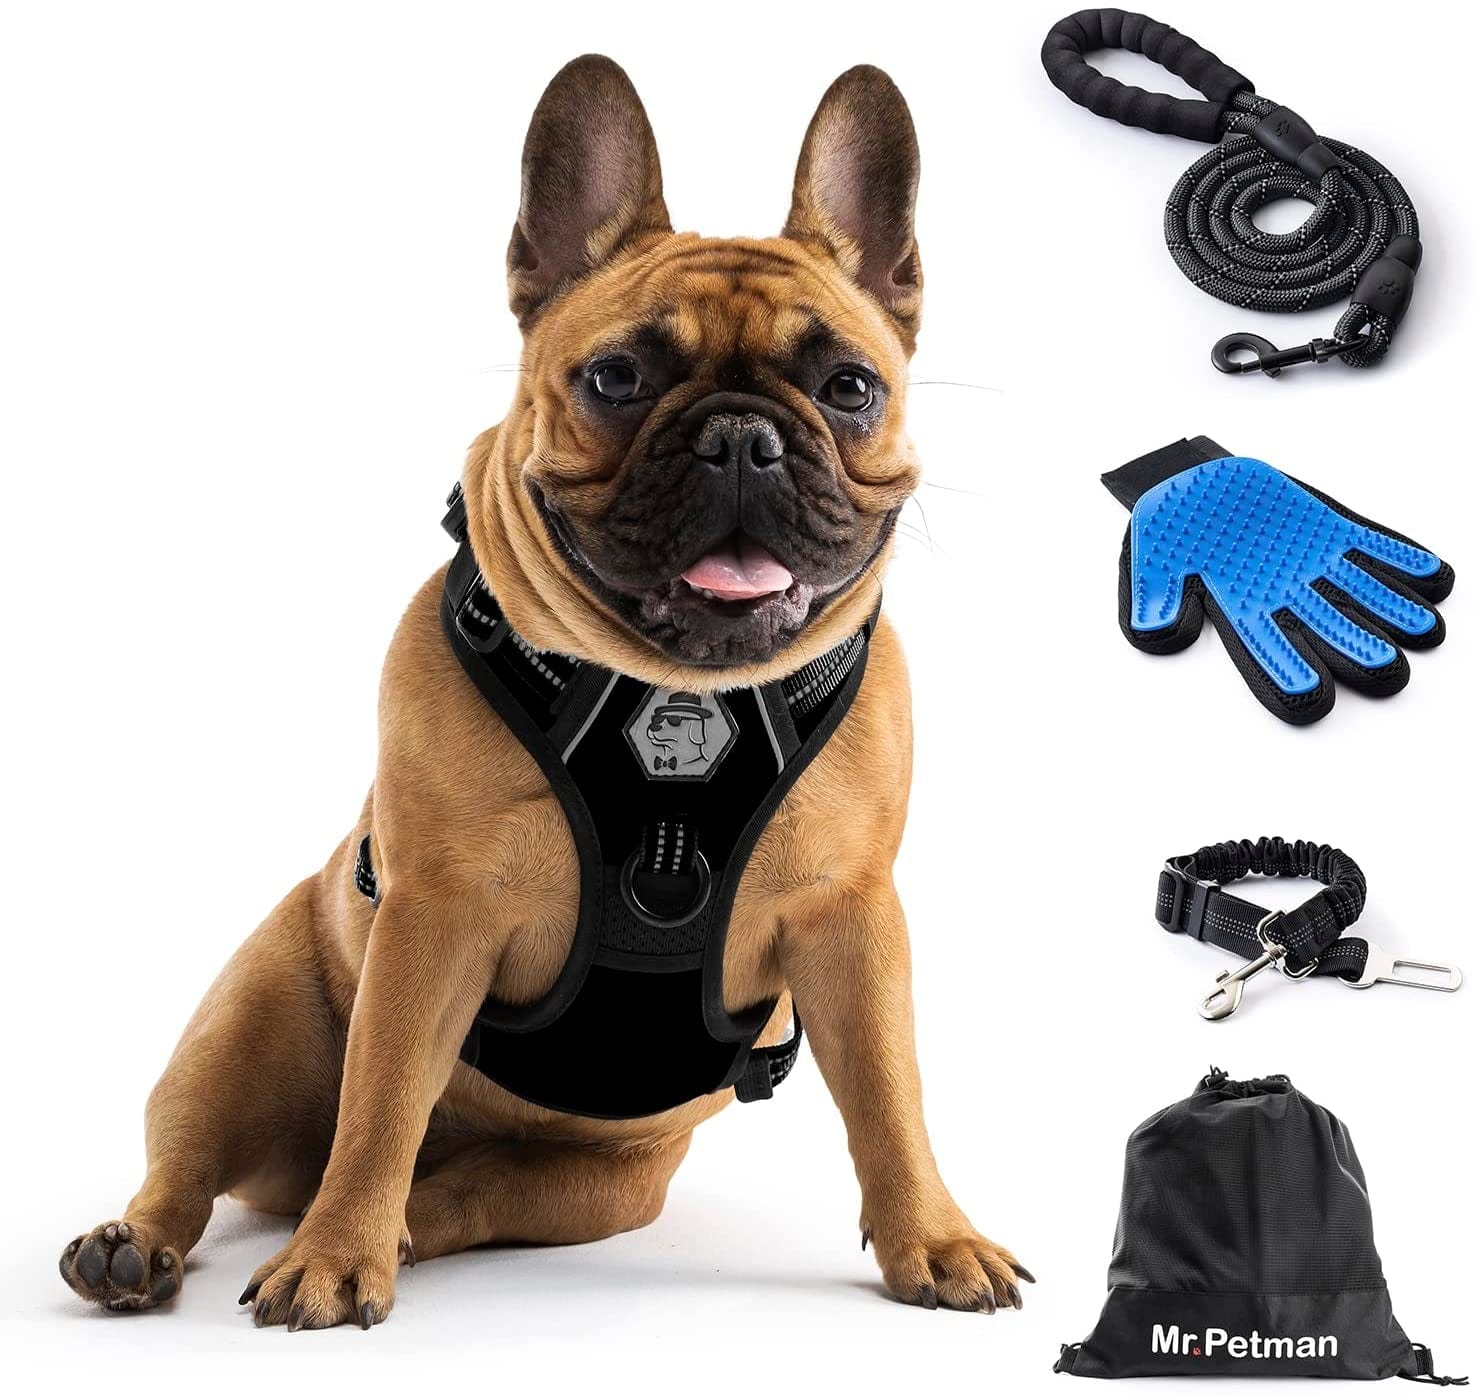 MR. PETMAN No Pull Dog Harness with Leash, Seat Belt, Grooming Glove - No Choke Dog Harness Set for Small Medium Large Dogs- Reflective Adjustable Dog Vest Harnesses with Handle for Walking Training Animals & Pet Supplies > Pet Supplies > Dog Supplies > Dog Apparel Mr. Petman Classic Black Small 